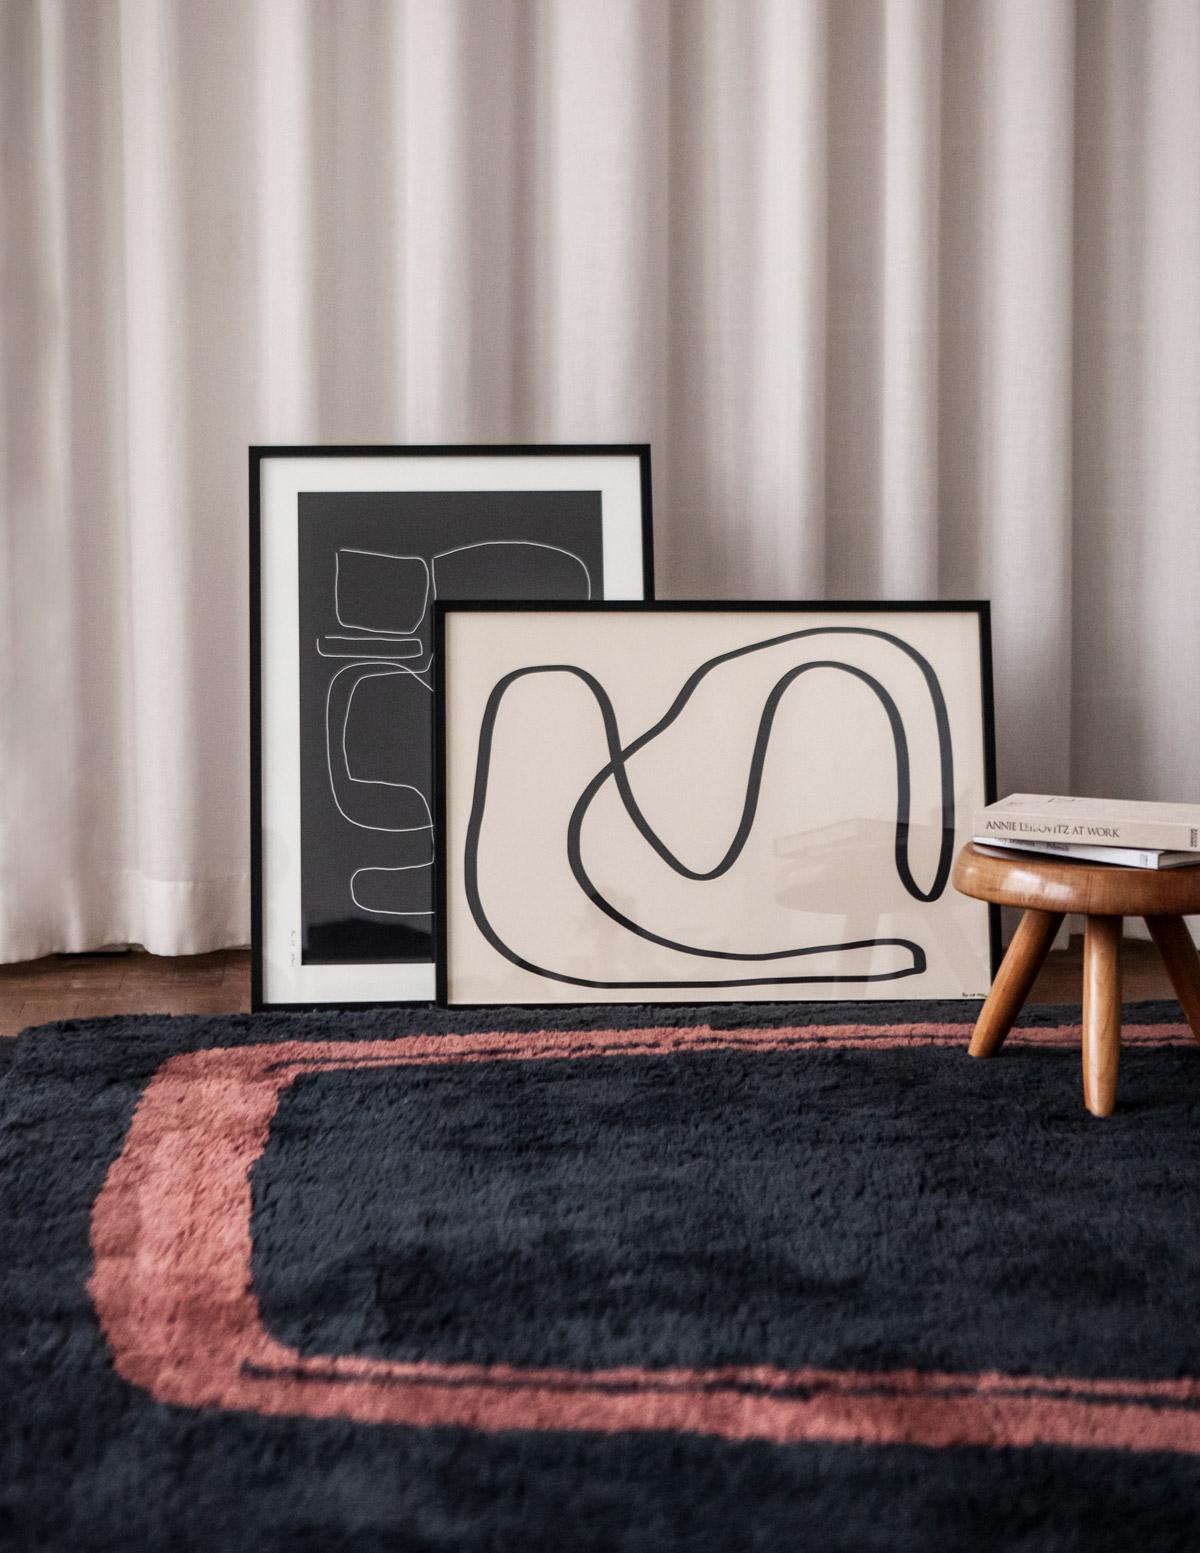 Designed in collaboration with Danish artist Carsten Beck Nielsen. The collection consists of three works of art – Simple object 11, Simple object 18 and Connection – which have been carefully selected and translated into rugs. The rugs are